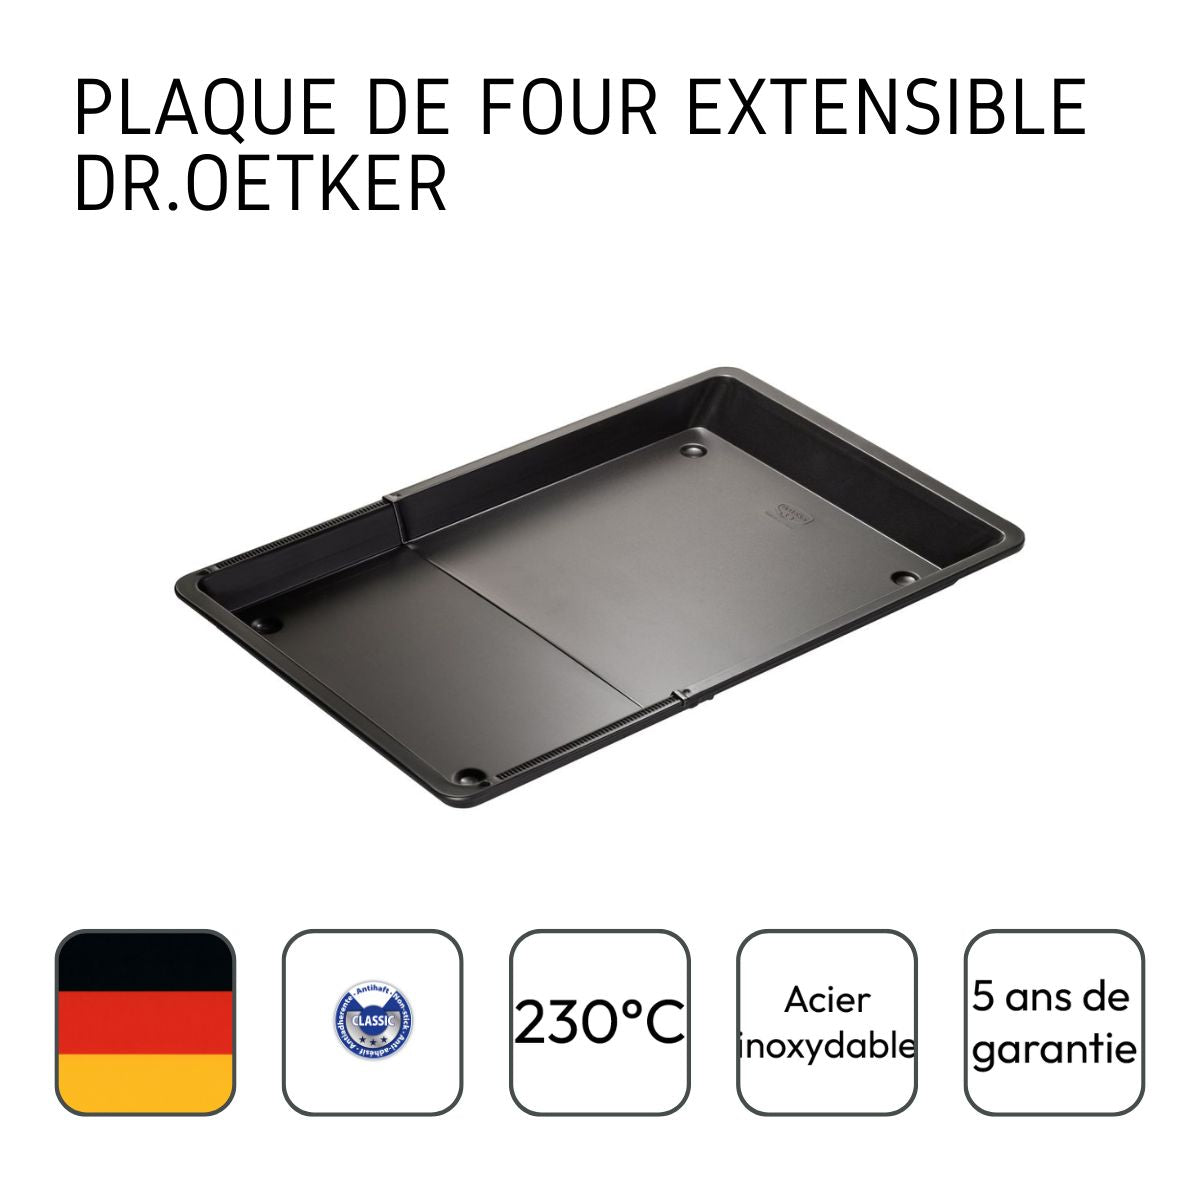 Plaque four extensible Dr Oetker Tradition